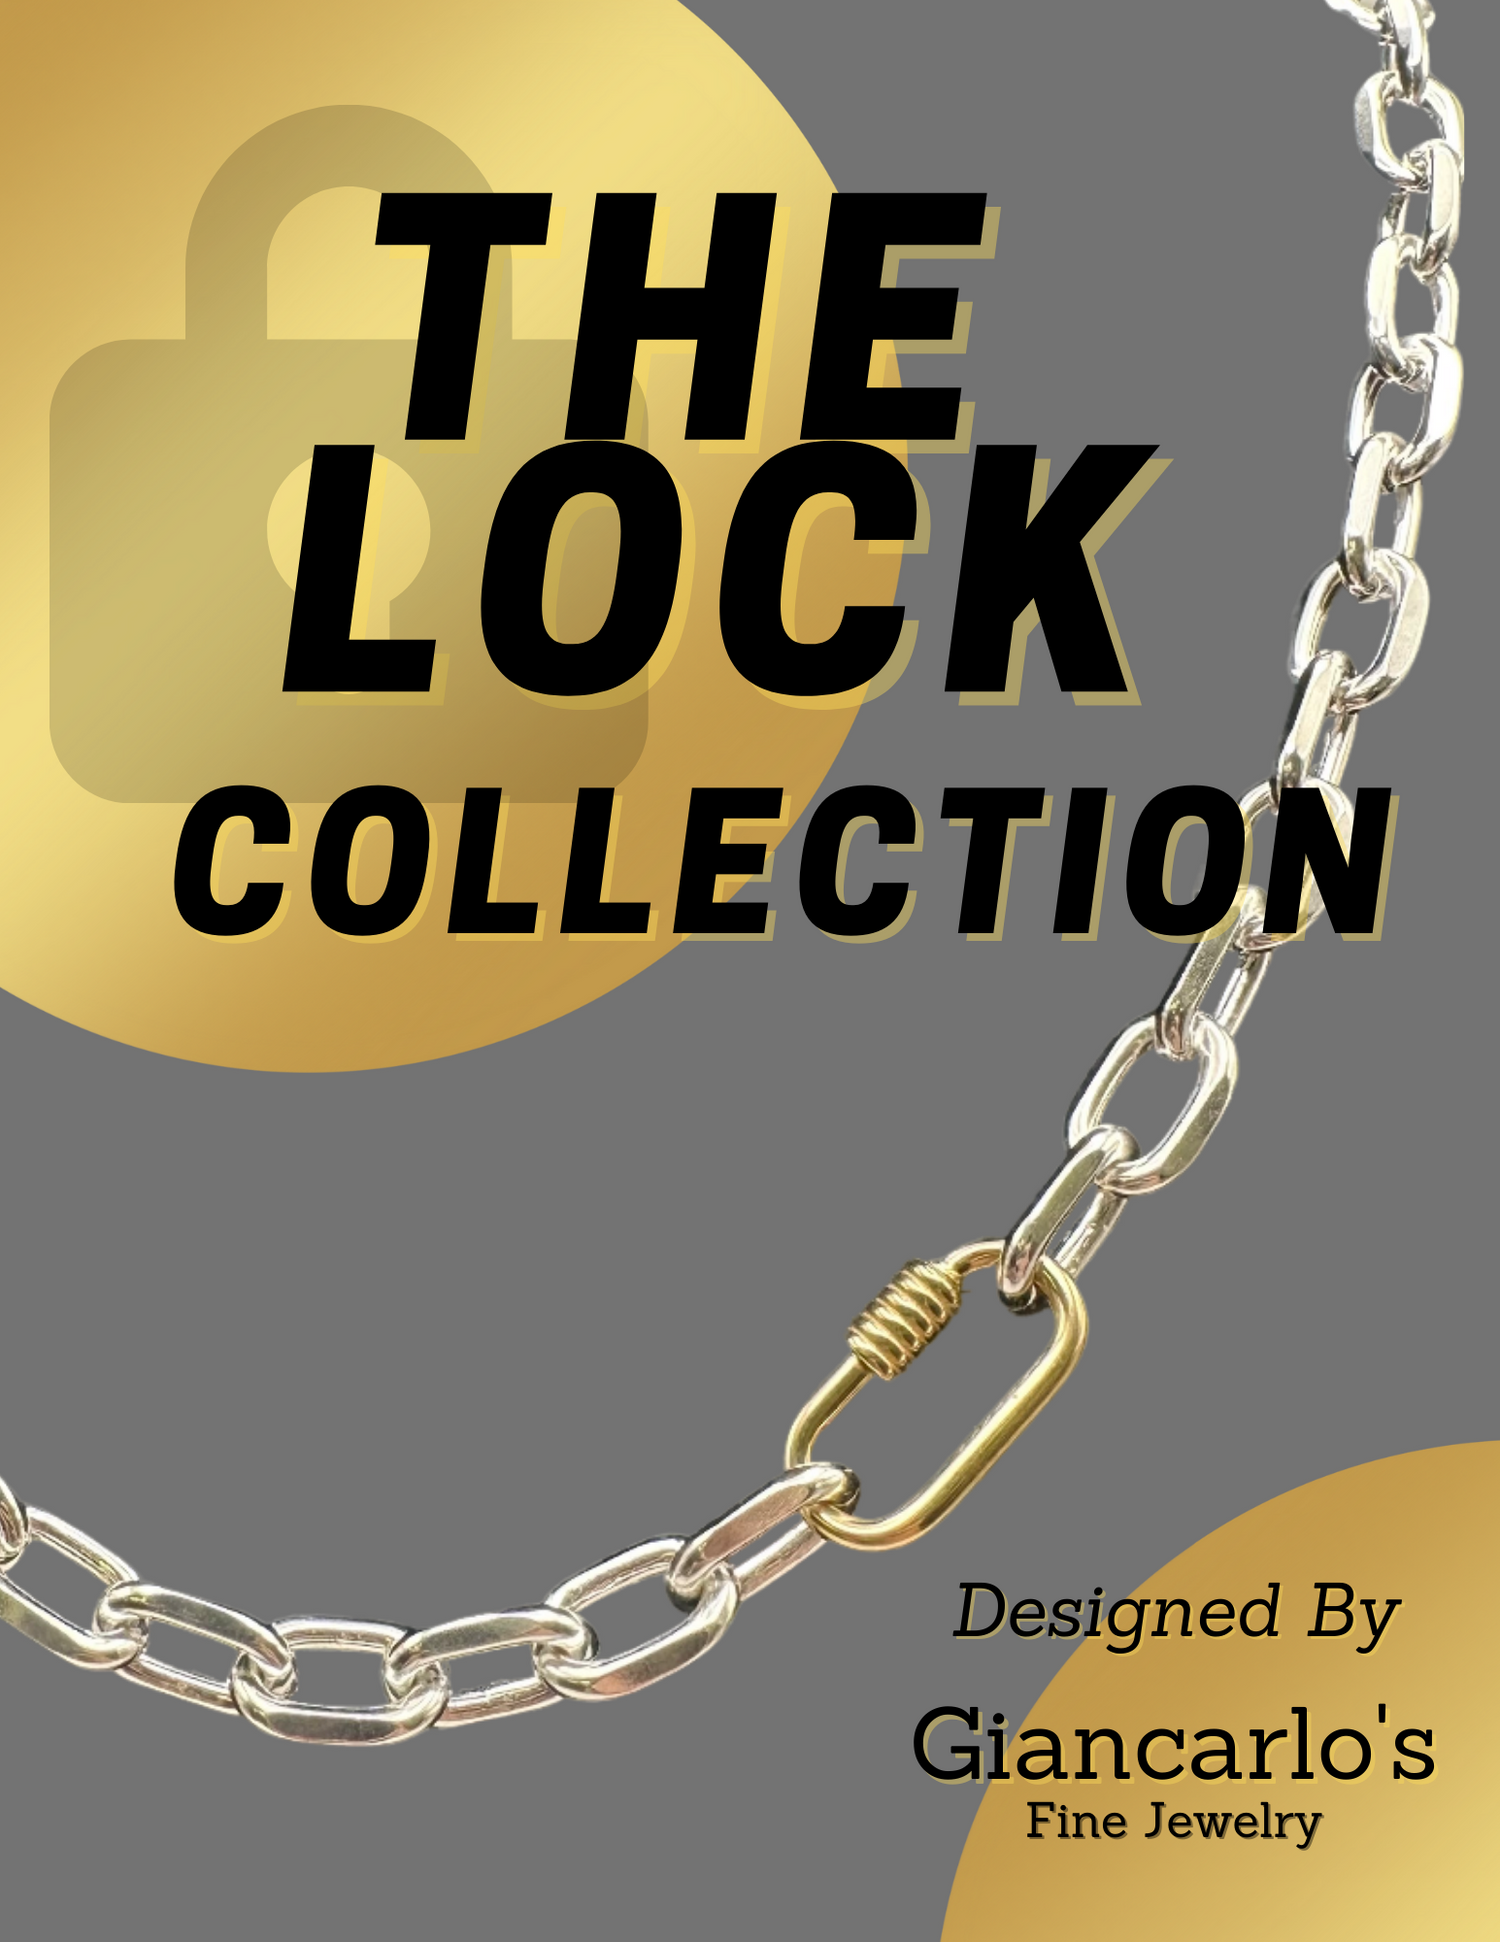 The Lock Collection